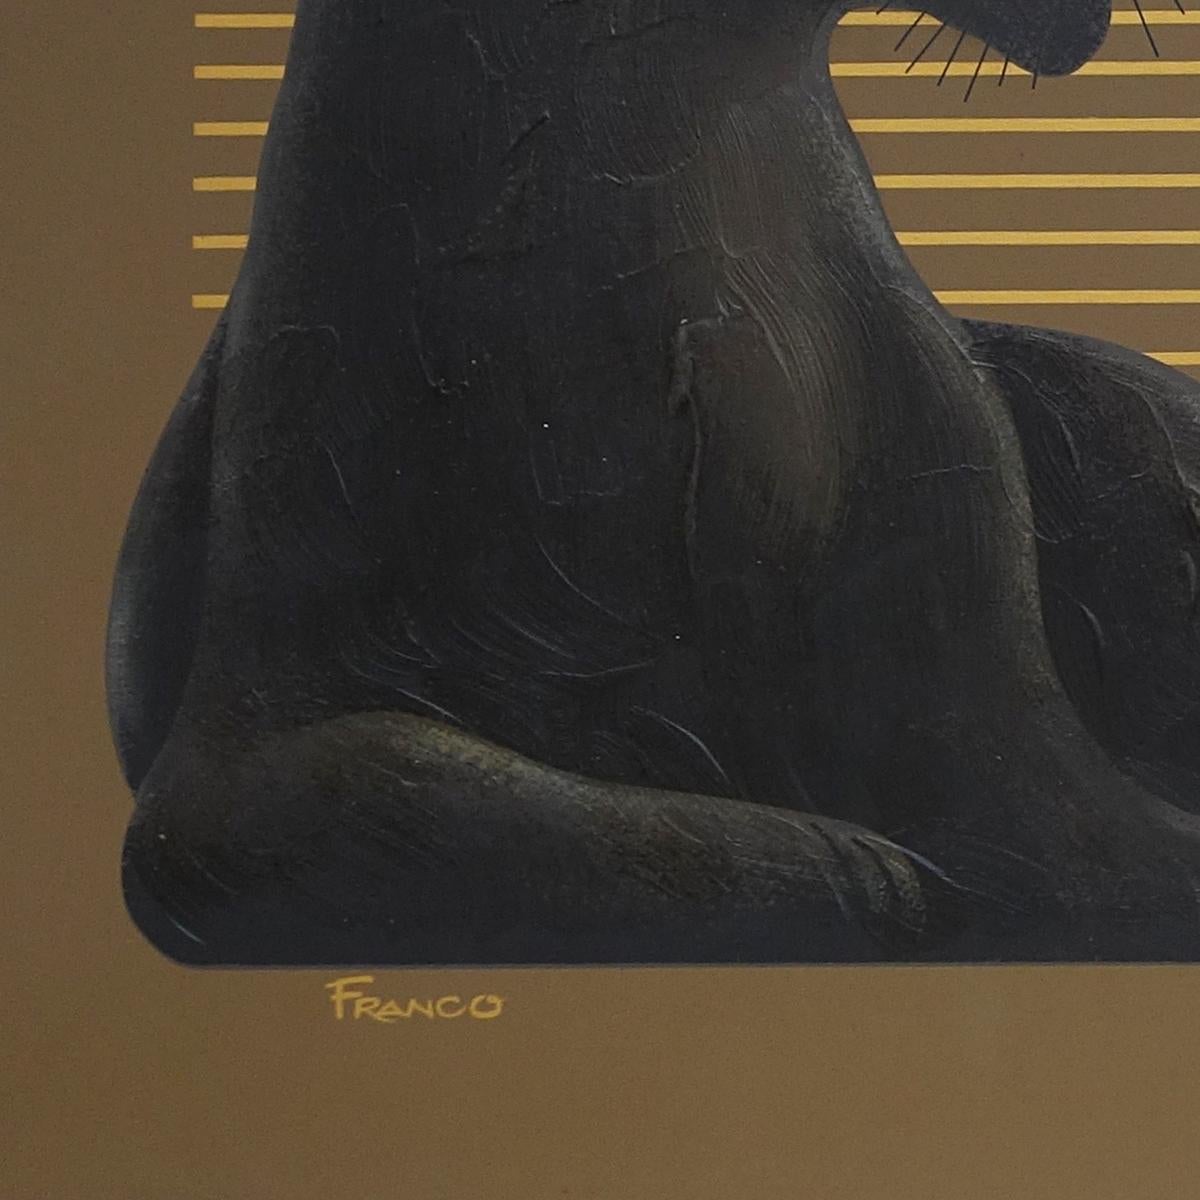 Dutch Impressive Painting of a Black Panther at Sunset by Franco for Artmeister Studio